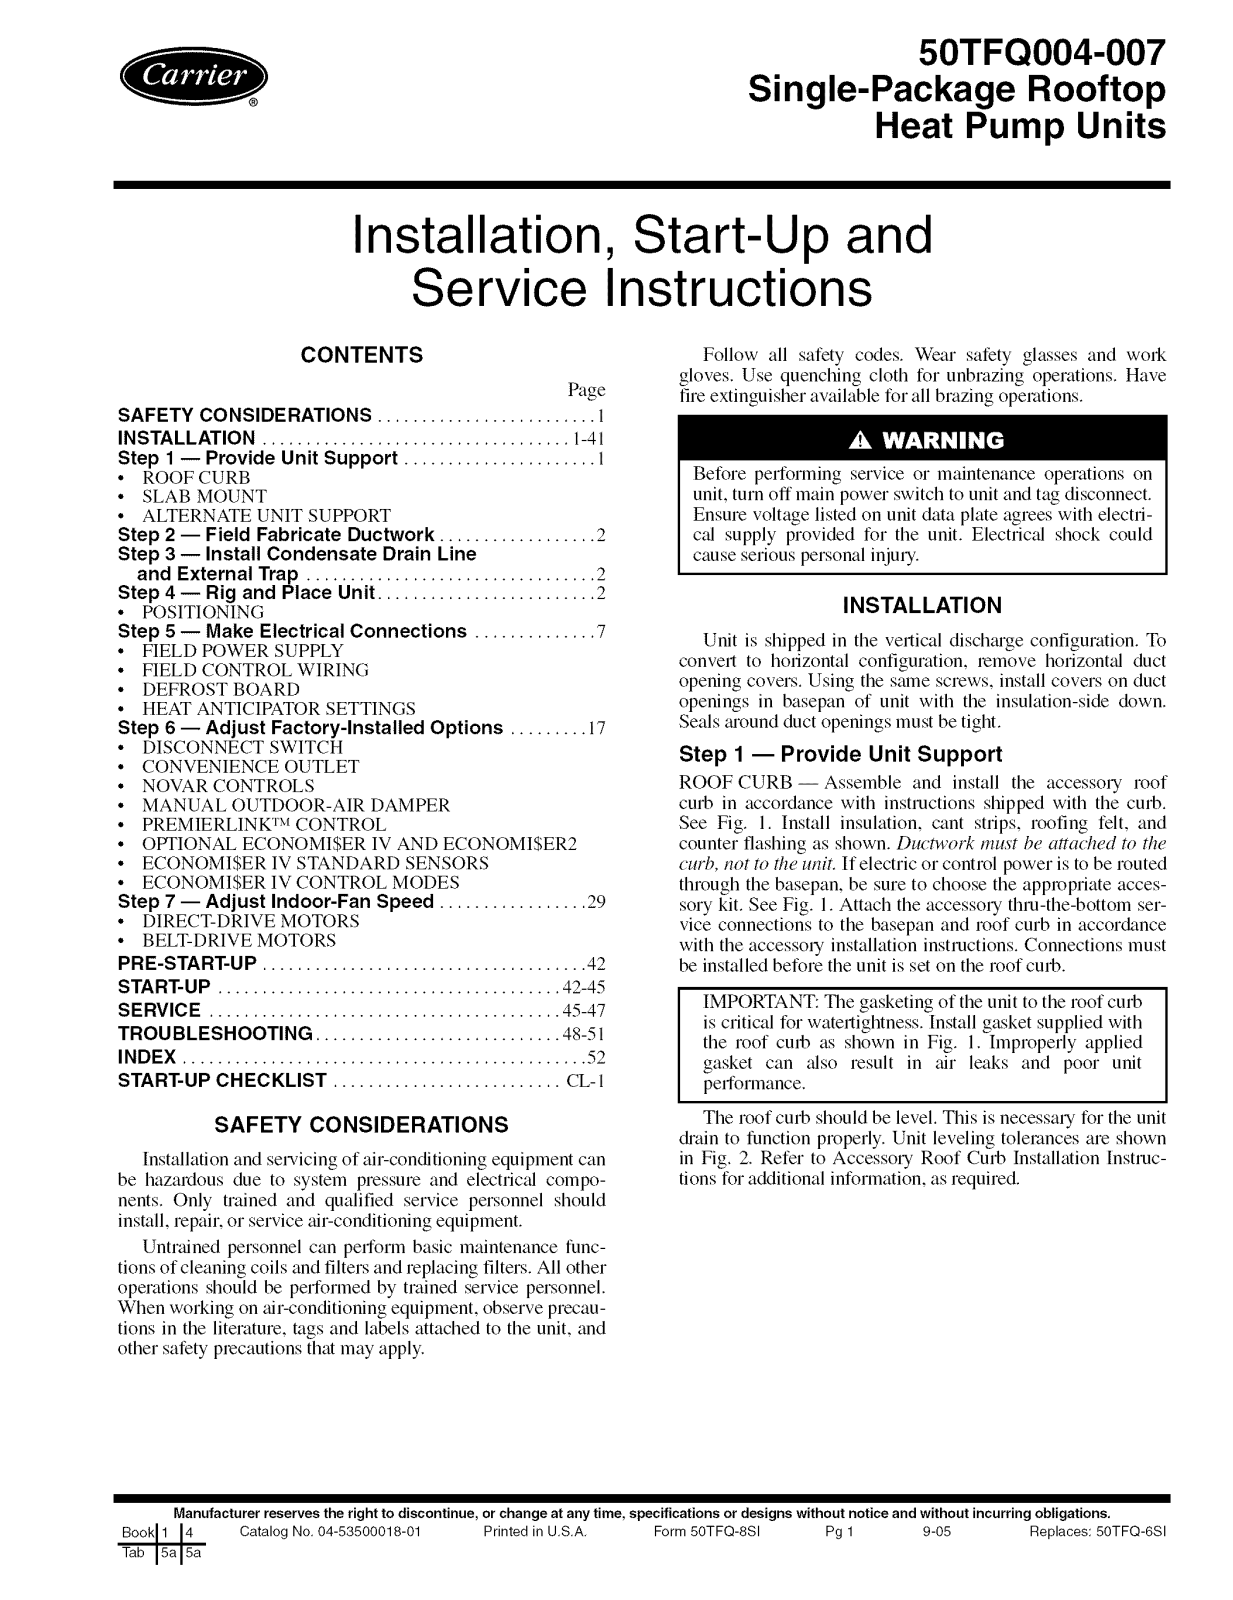 Carrier 50TFQ004-007 User Manual